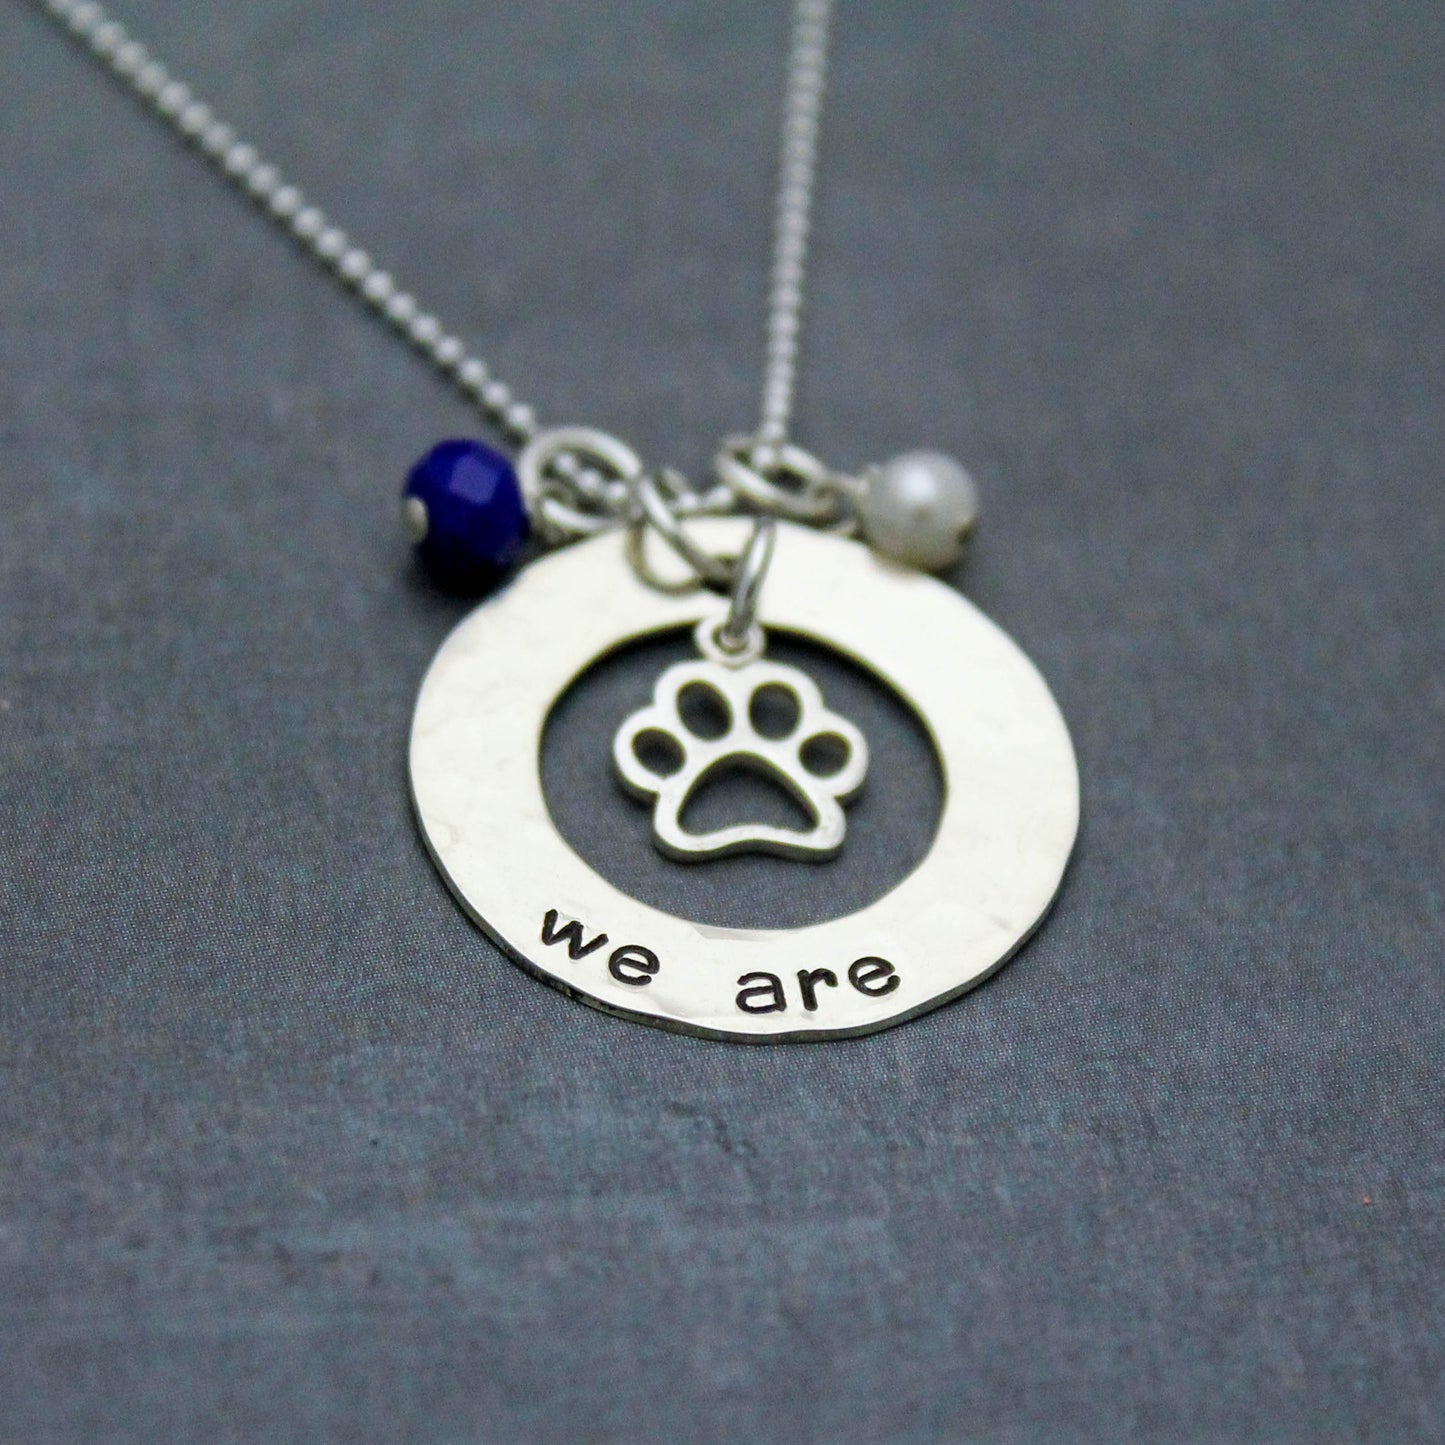 We Are Necklace, Penn State Necklace, Nittany Lions Gift, PSU Grad Gift, Graduation Gift for Penn State, Hand Stamped Jewelry, Silver Washer